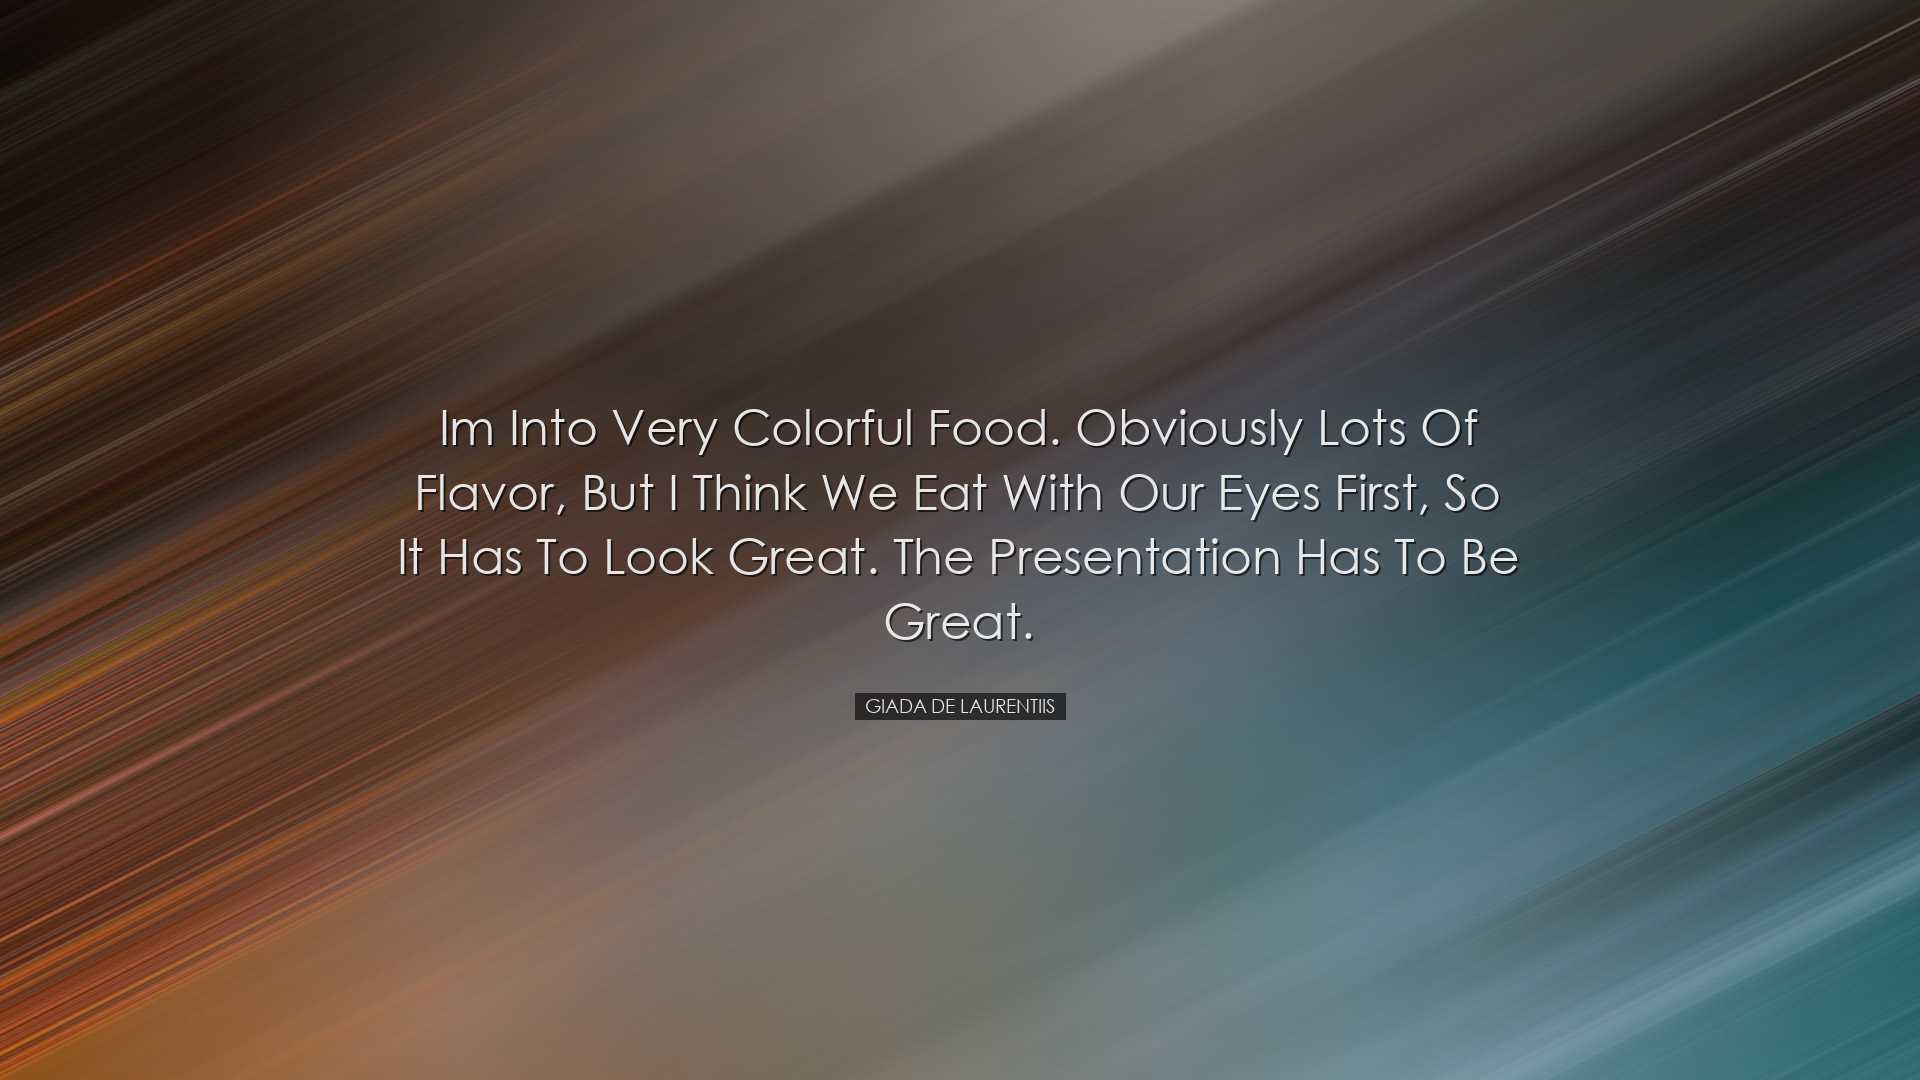 Im into very colorful food. Obviously lots of flavor, but I think